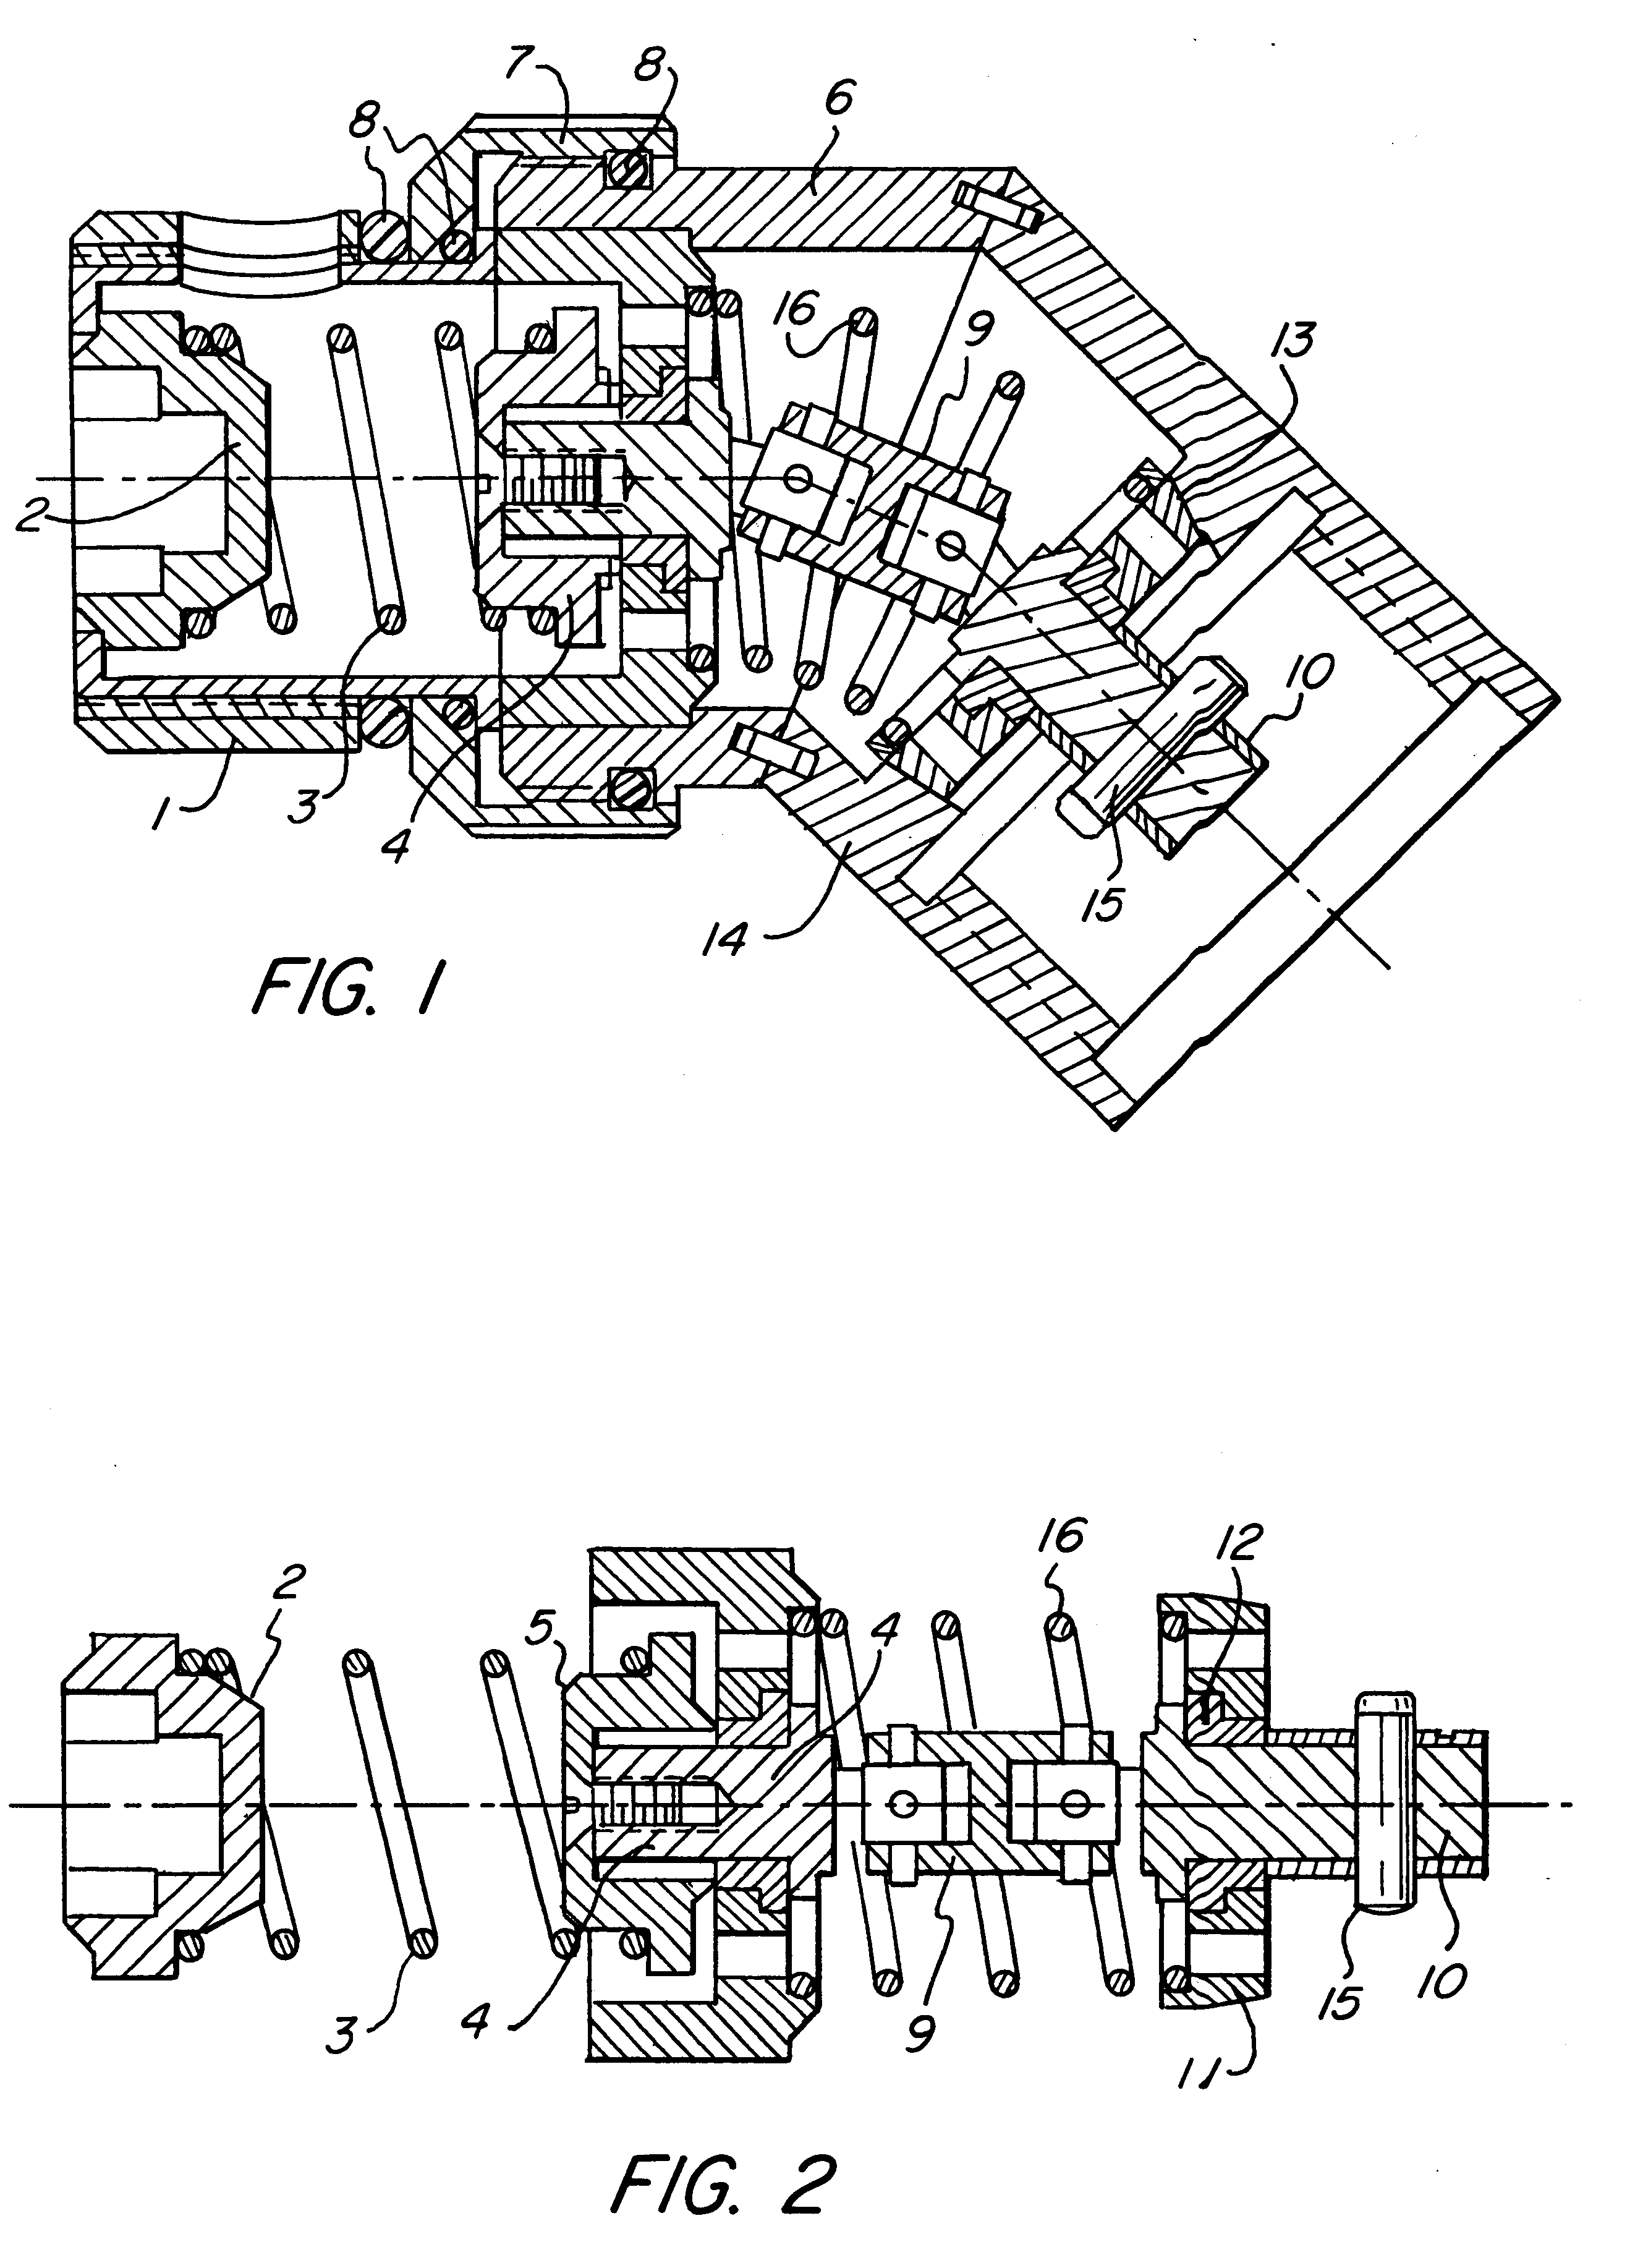 Motor-driven medical instrument with flexible shaft